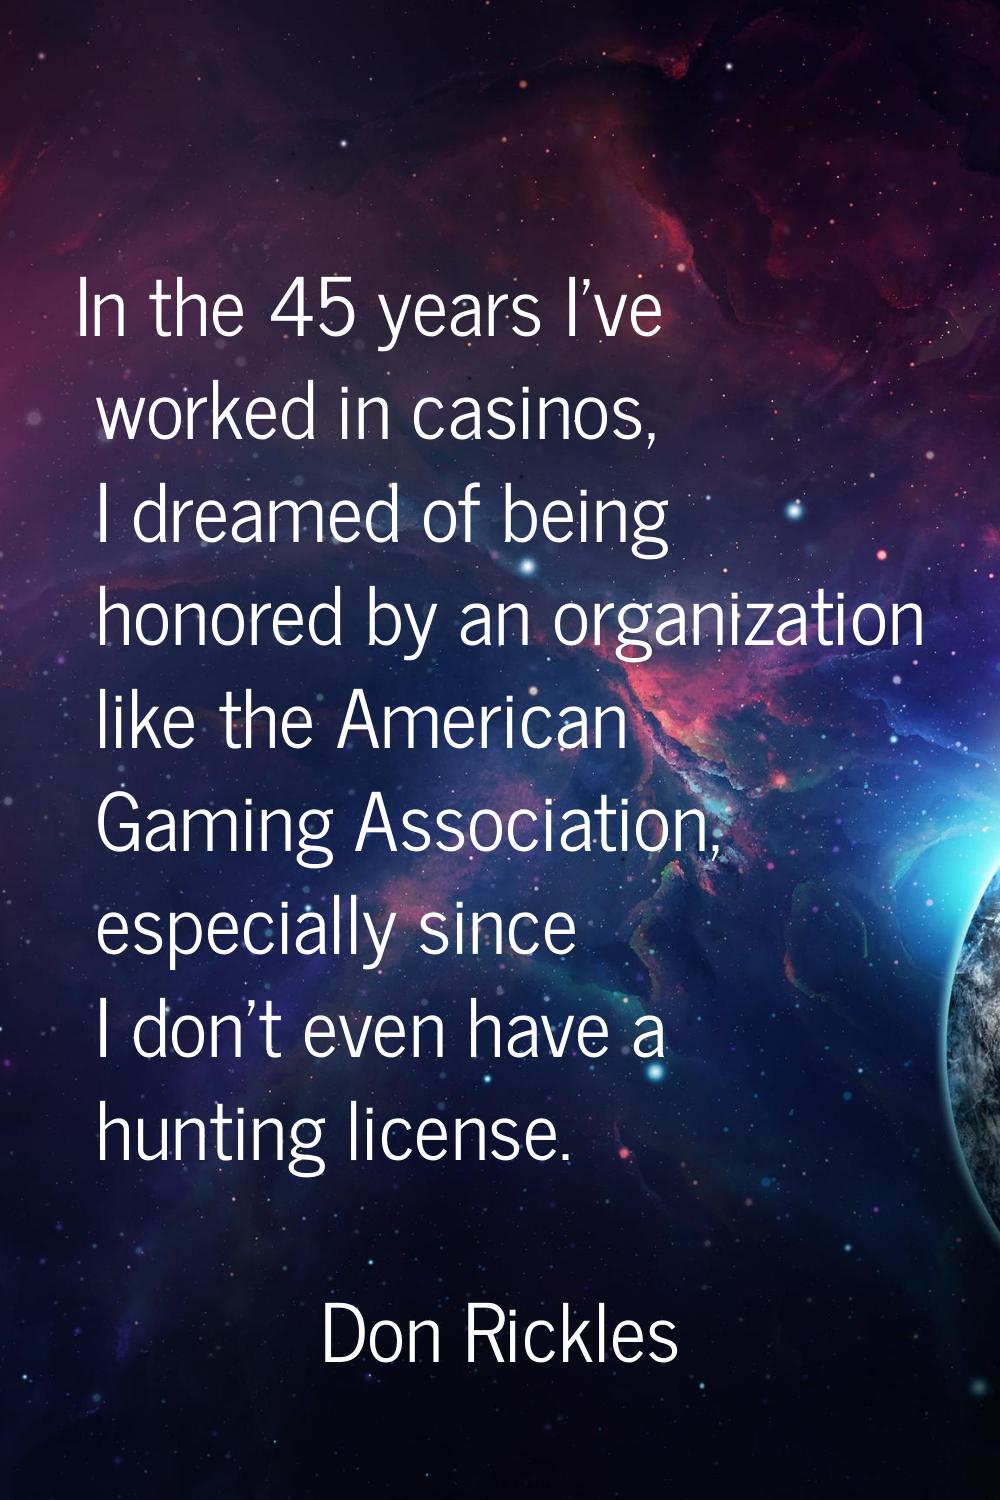 In the 45 years I've worked in casinos, I dreamed of being honored by an organization like the Amer